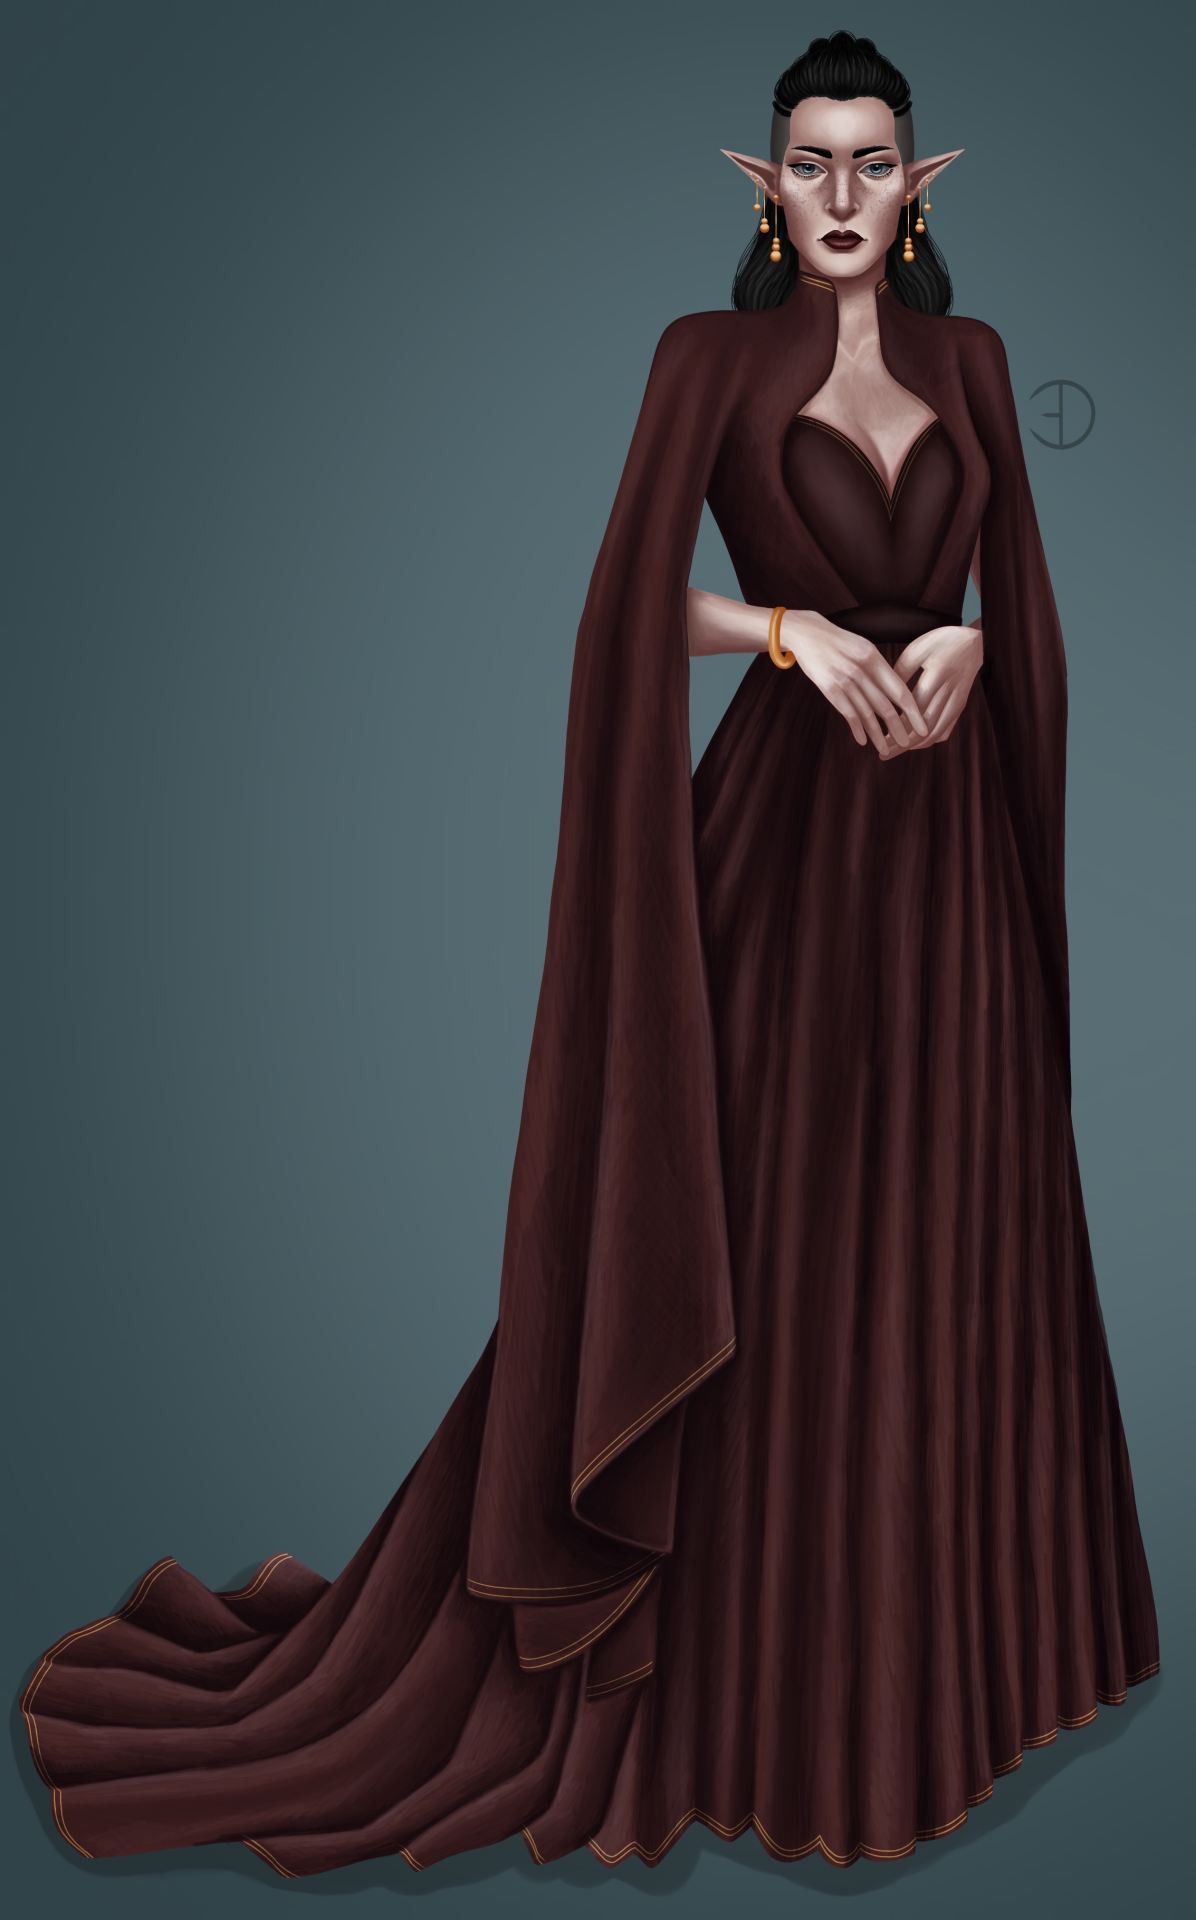 A full-body illustration of a regal-looking woman wearing a long, deep red dress with a built in Cape, standing with her hands clasped together delicately.